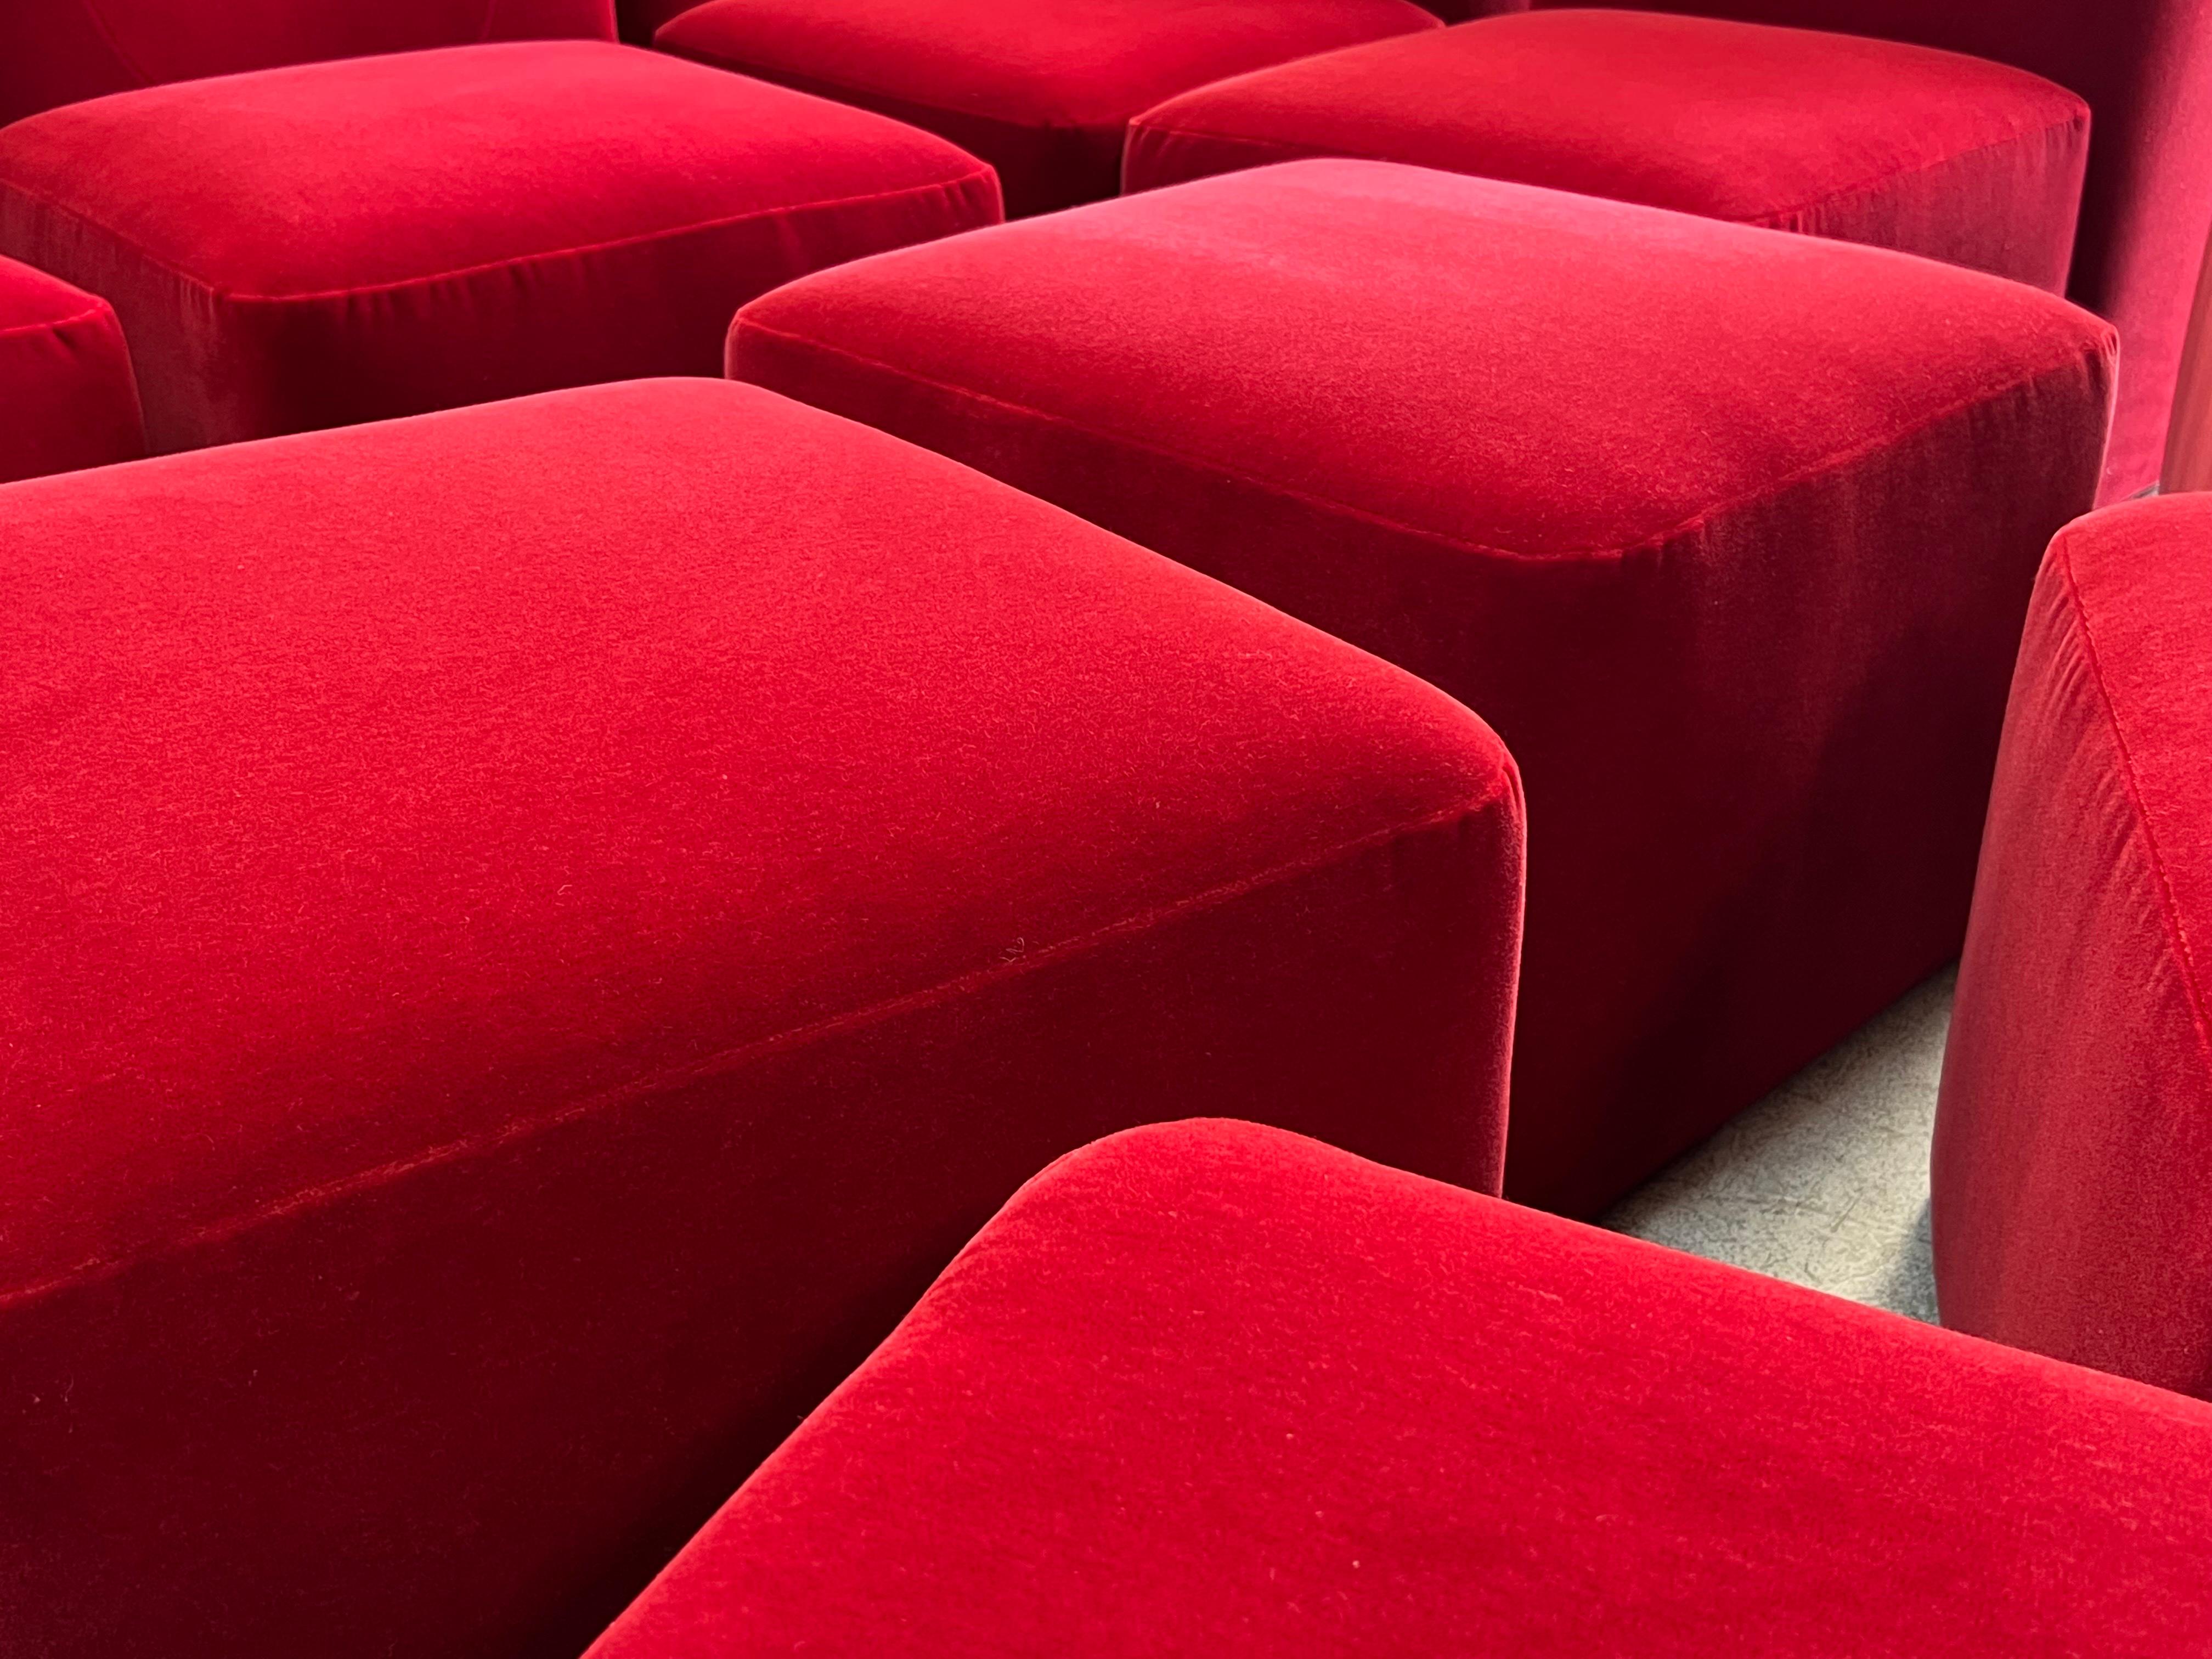 Italian Mariani 1970s Modular Sofa for Pace Collection in Red Mohair